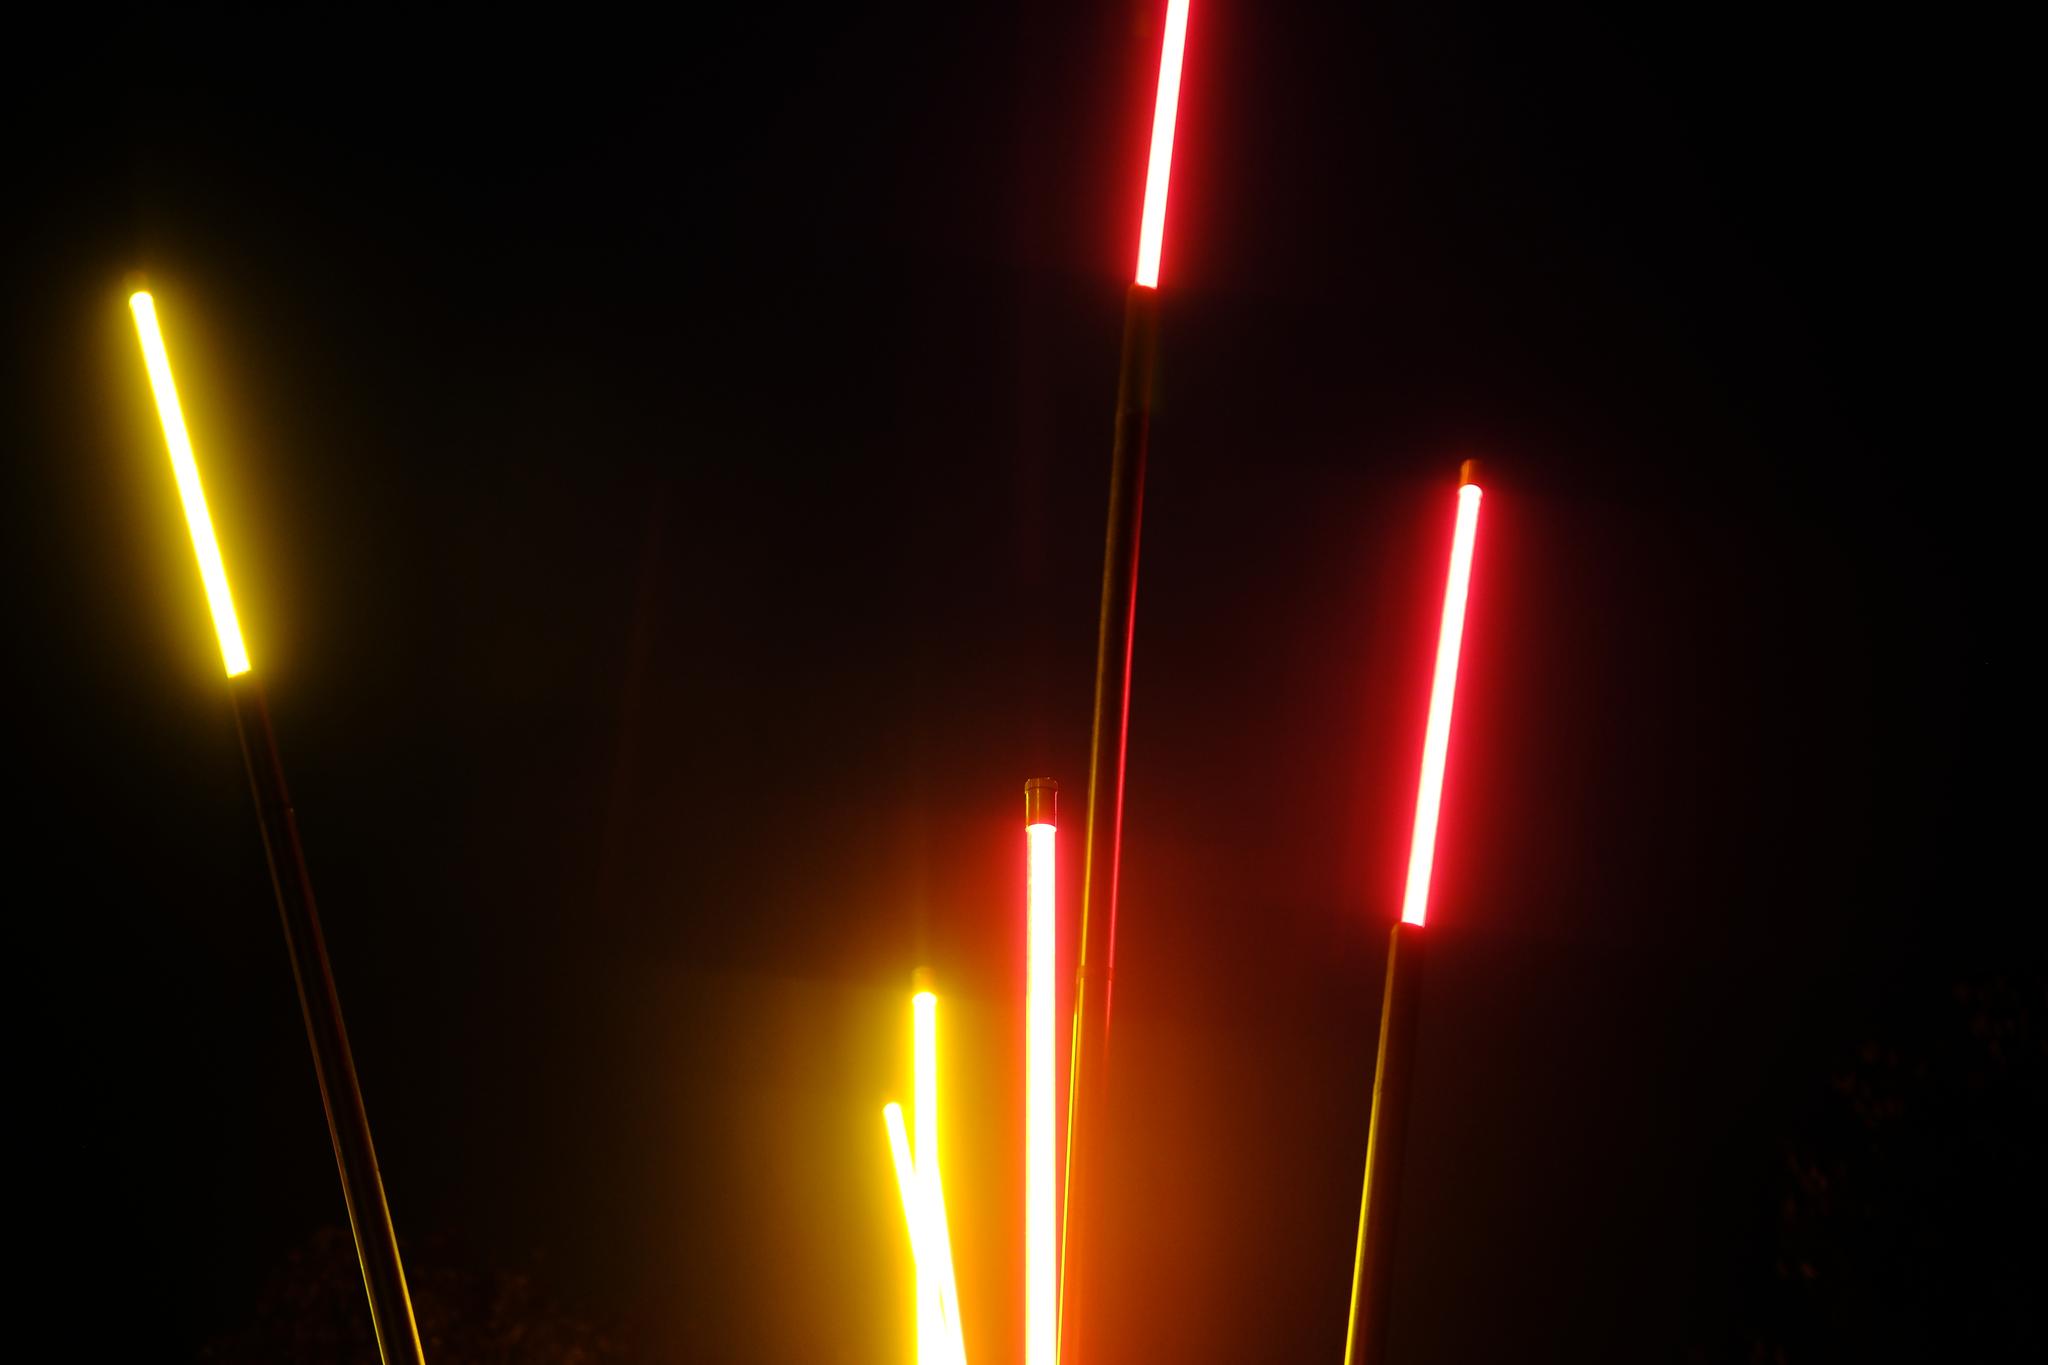 Bright, colorful light trails in red and yellow against a dark background